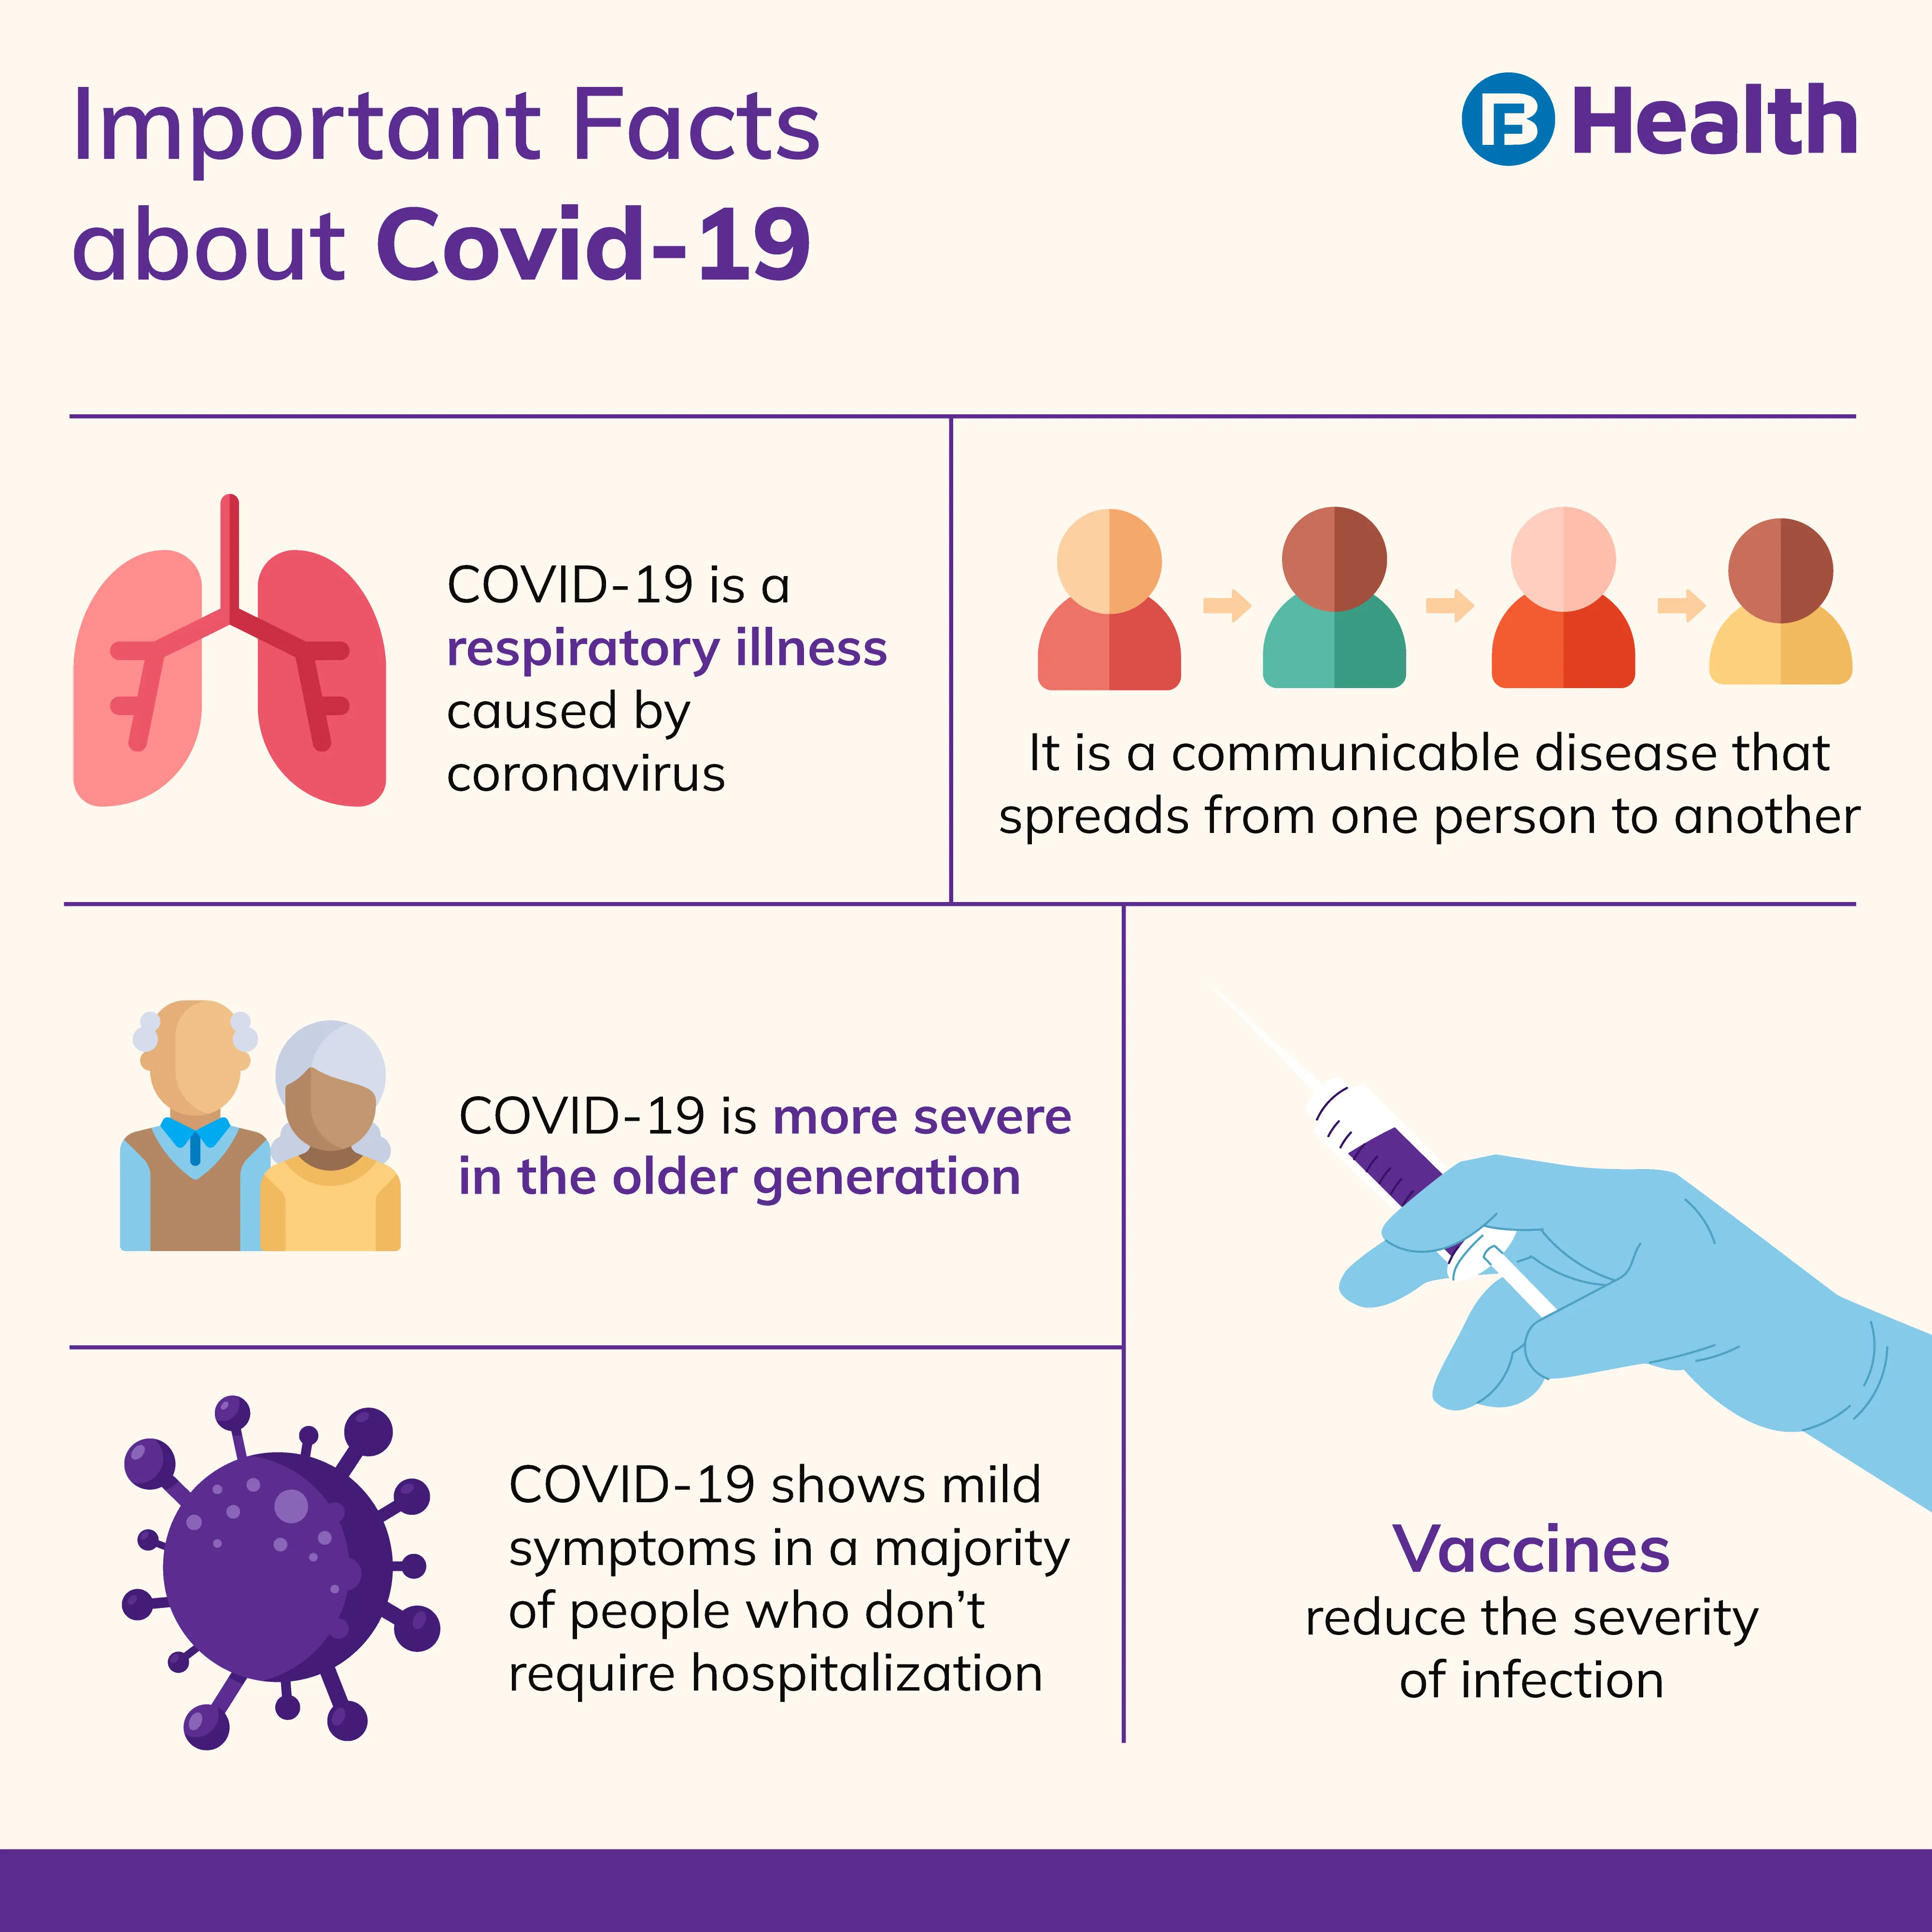 Facts about COVID-19